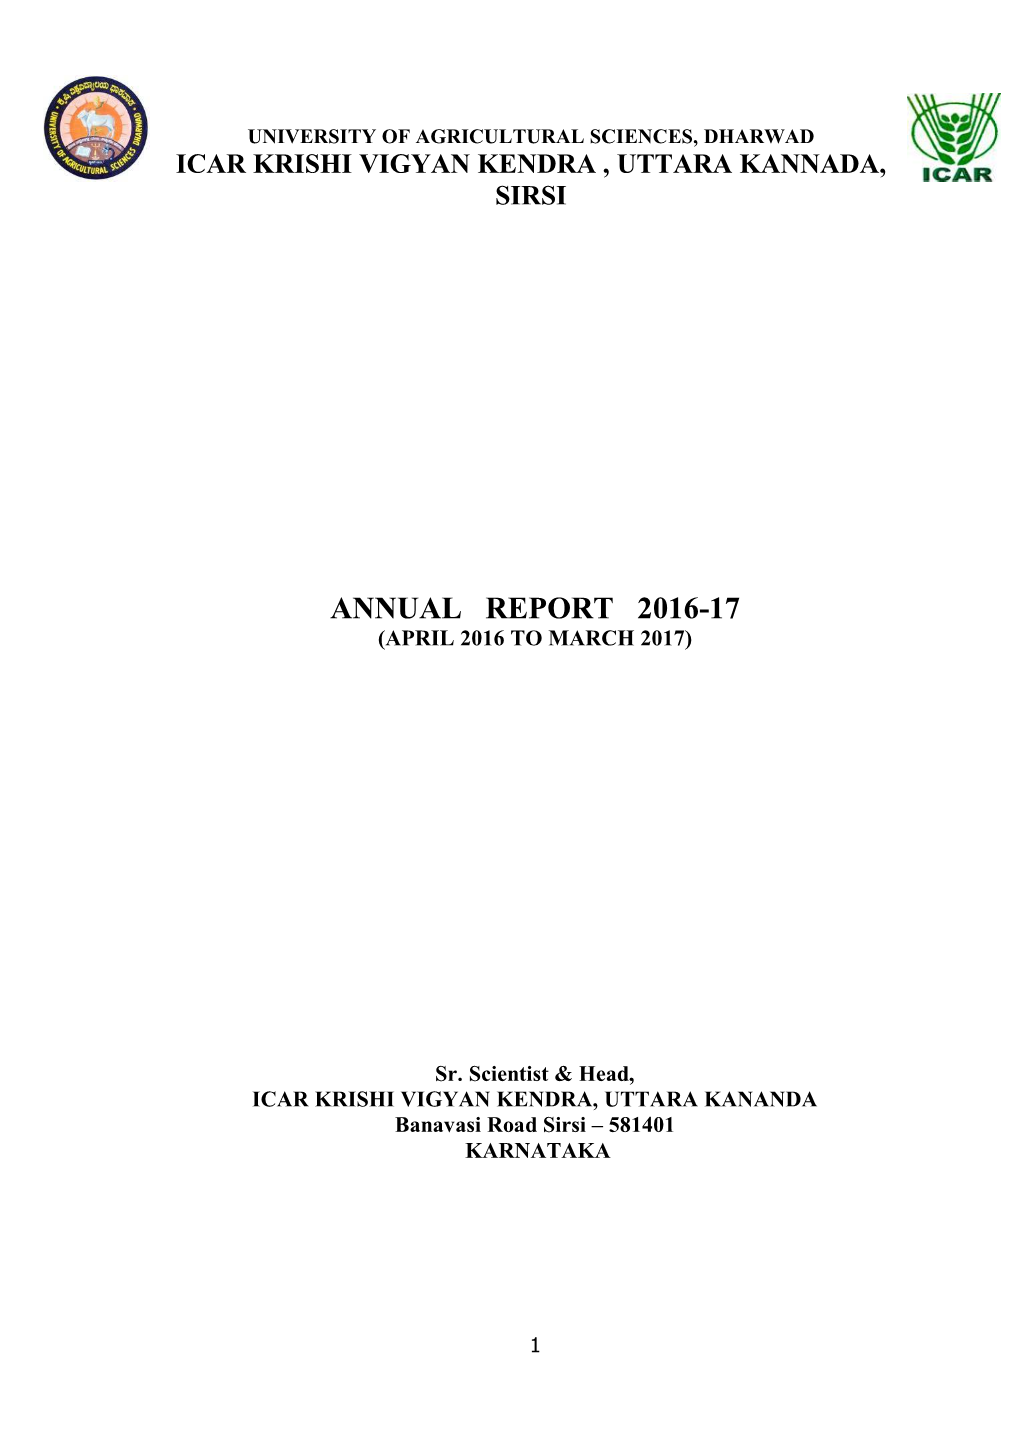 Annual Report 2016-17 (April 2016 to March 2017)